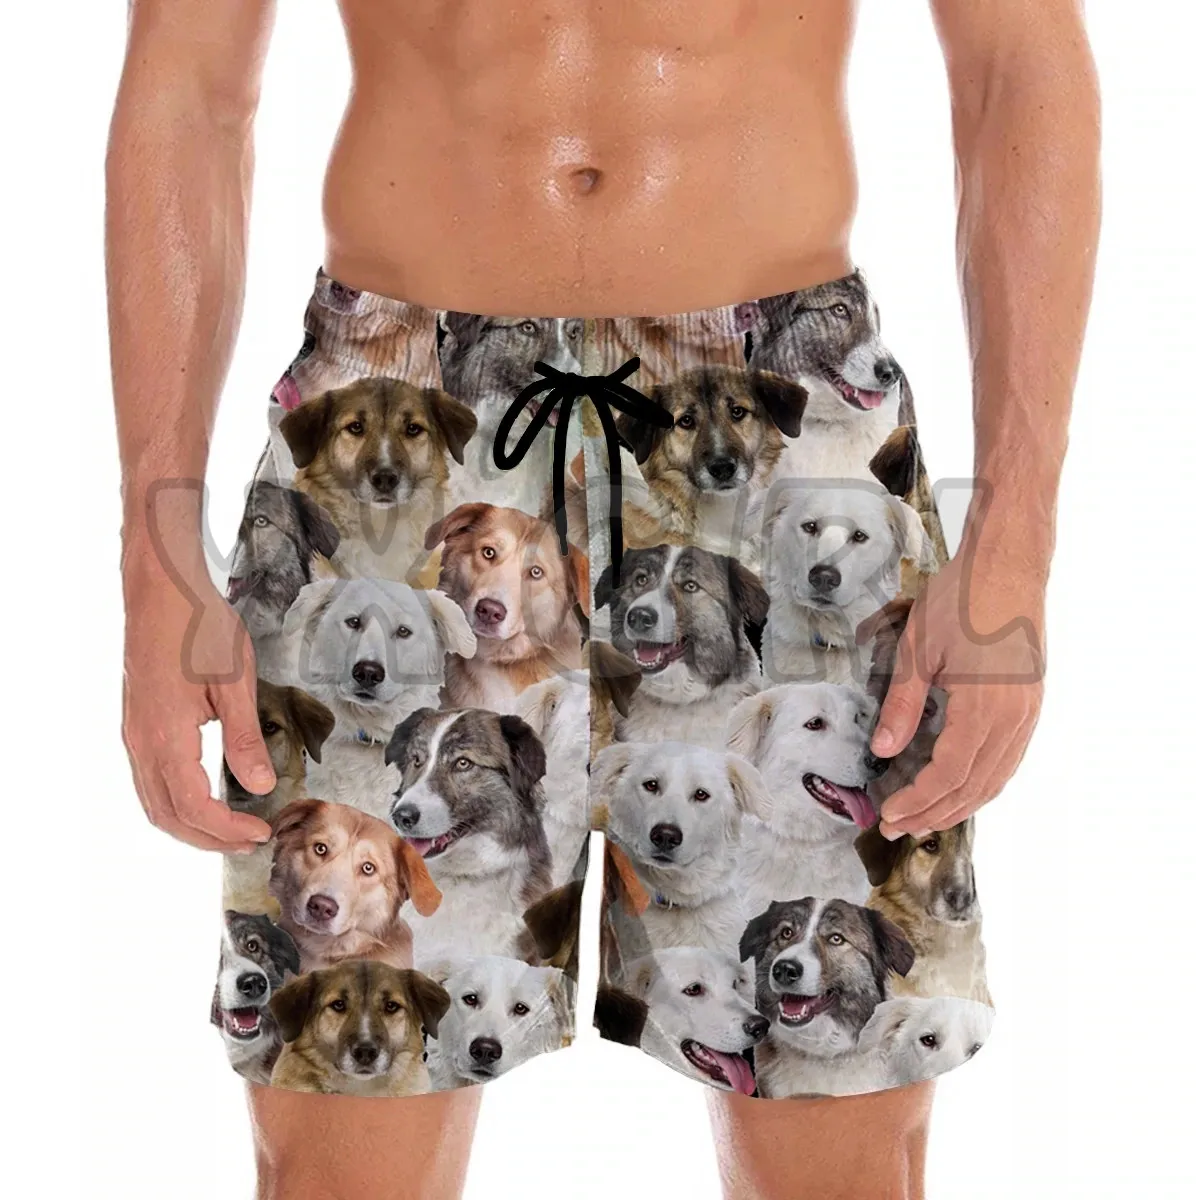 You get a lot of helpers Shorts  3D All Over Printed Men's Shorts Quick Drying Beach Shorts Summer Beach Swim Trunks